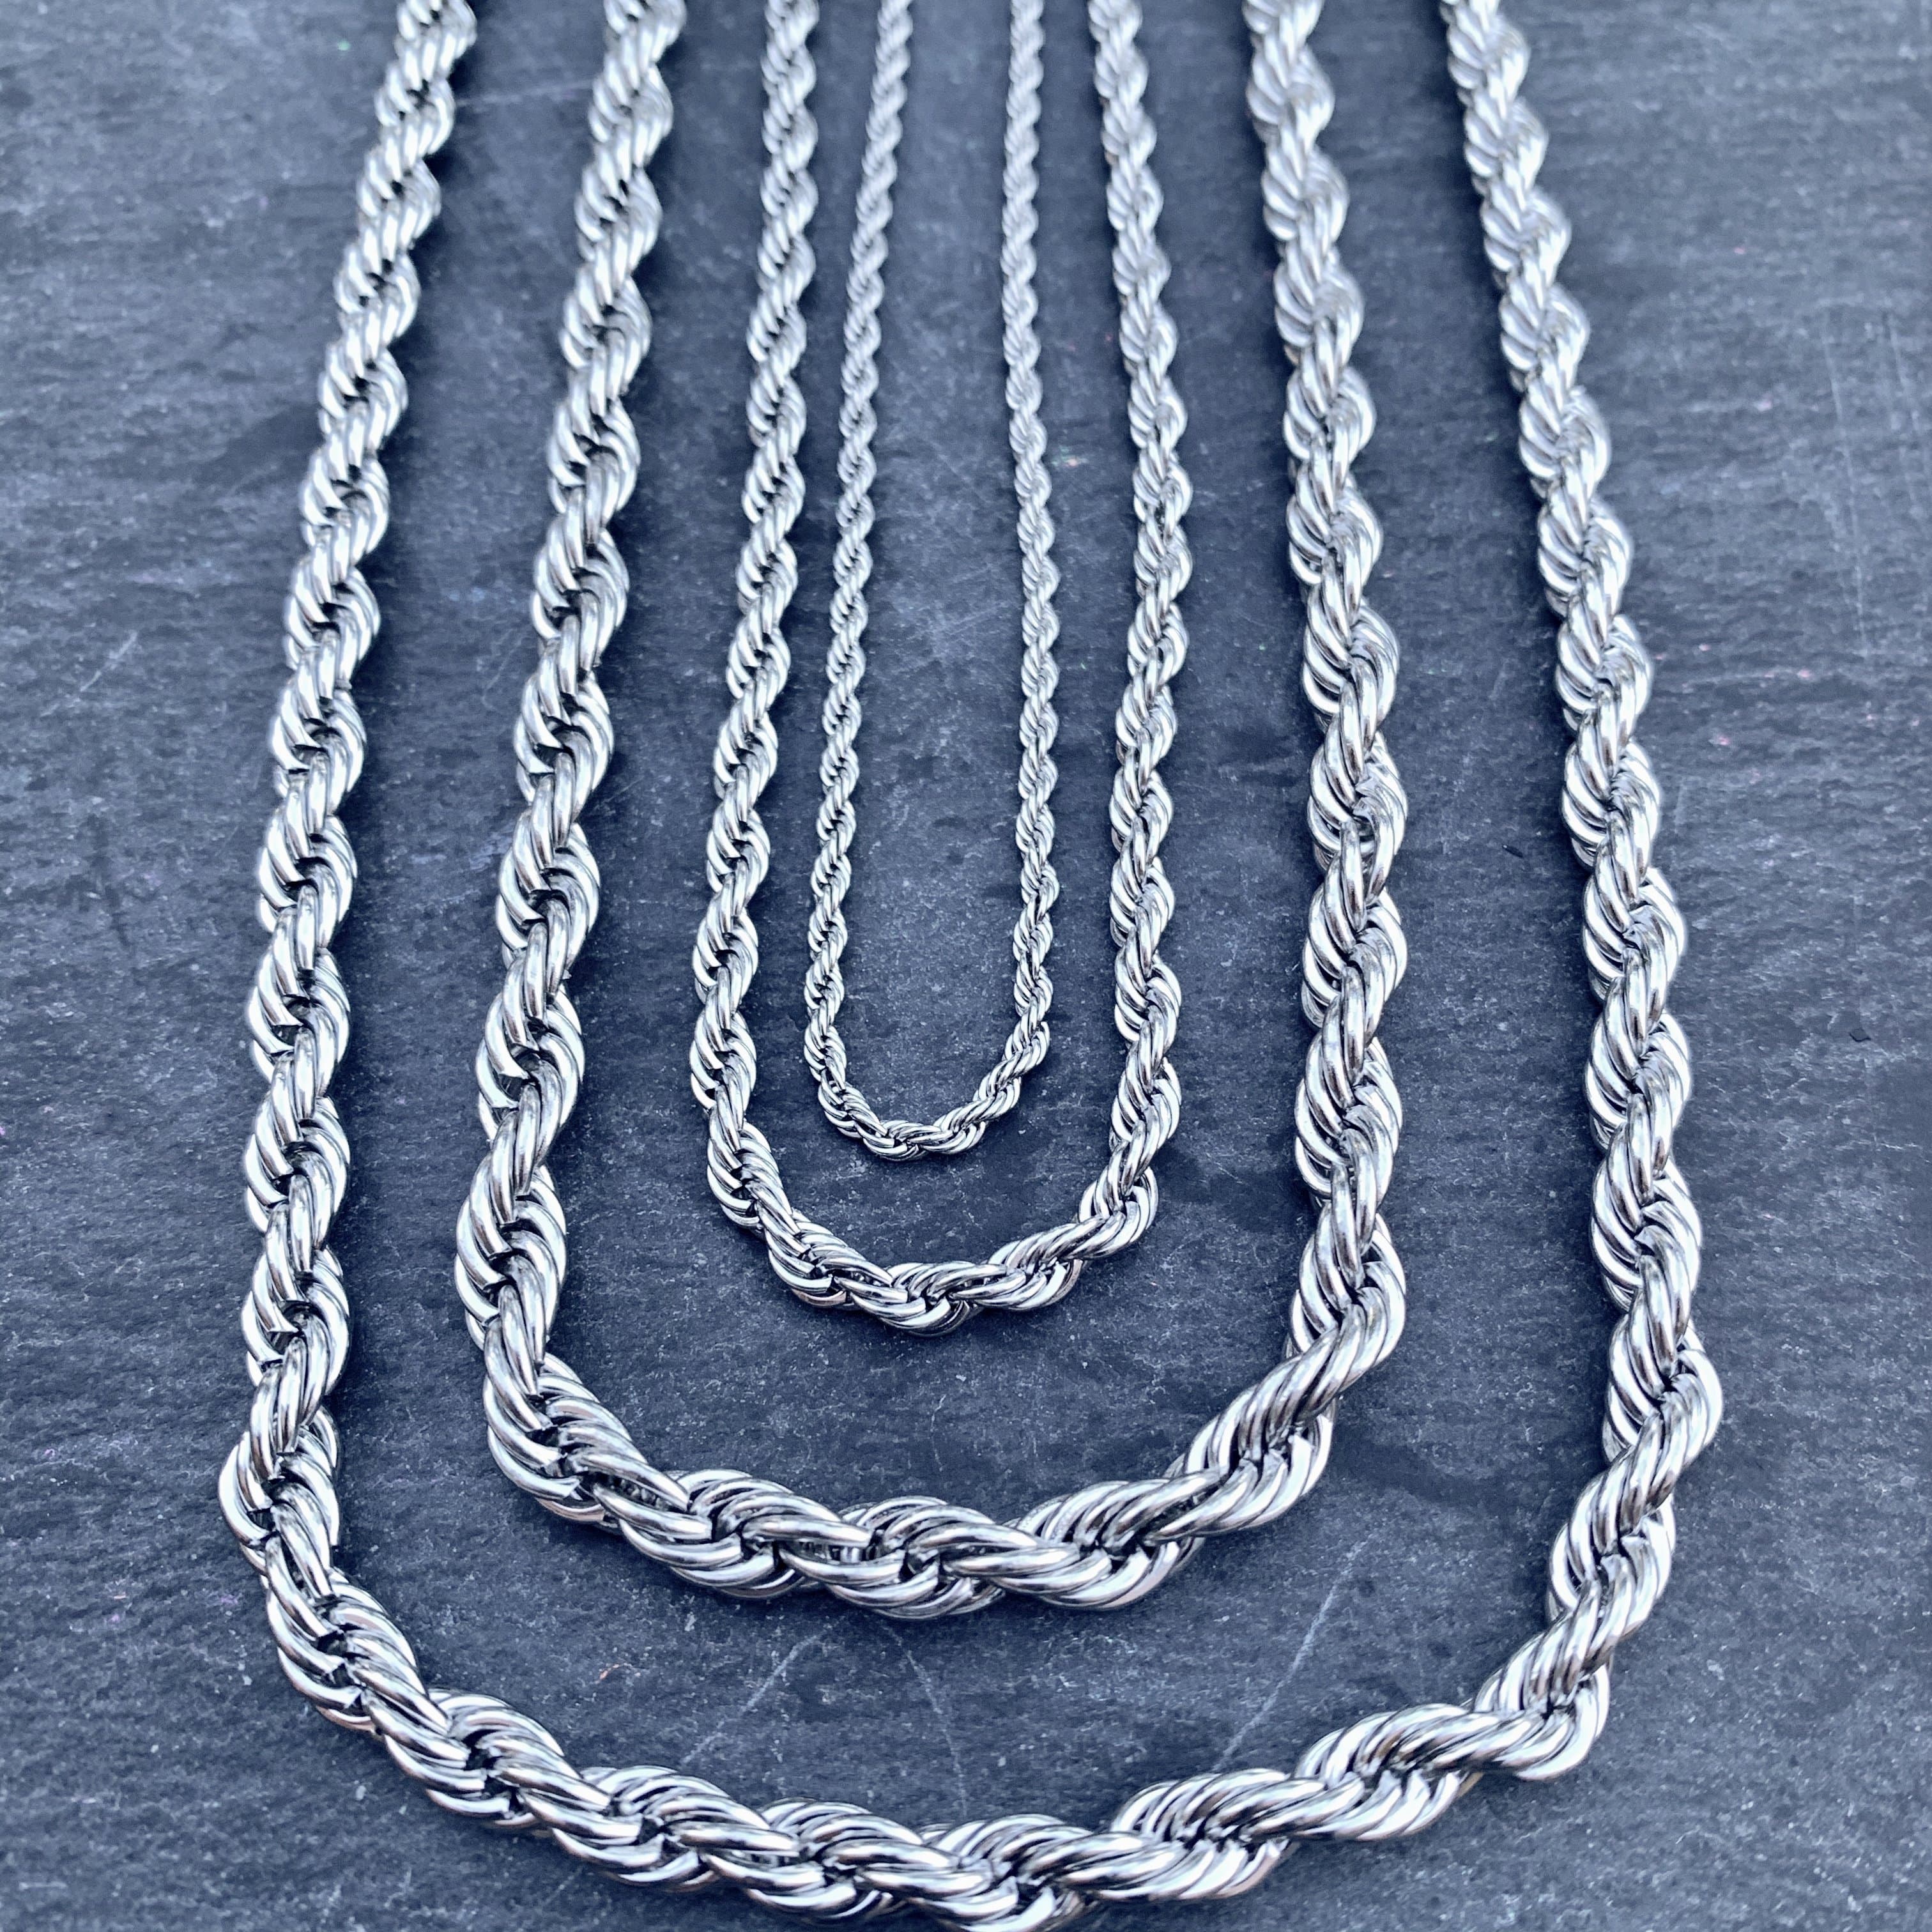 Classic Rope Chain - 2mm, 4mm, 6mm - 16-30 inch length!